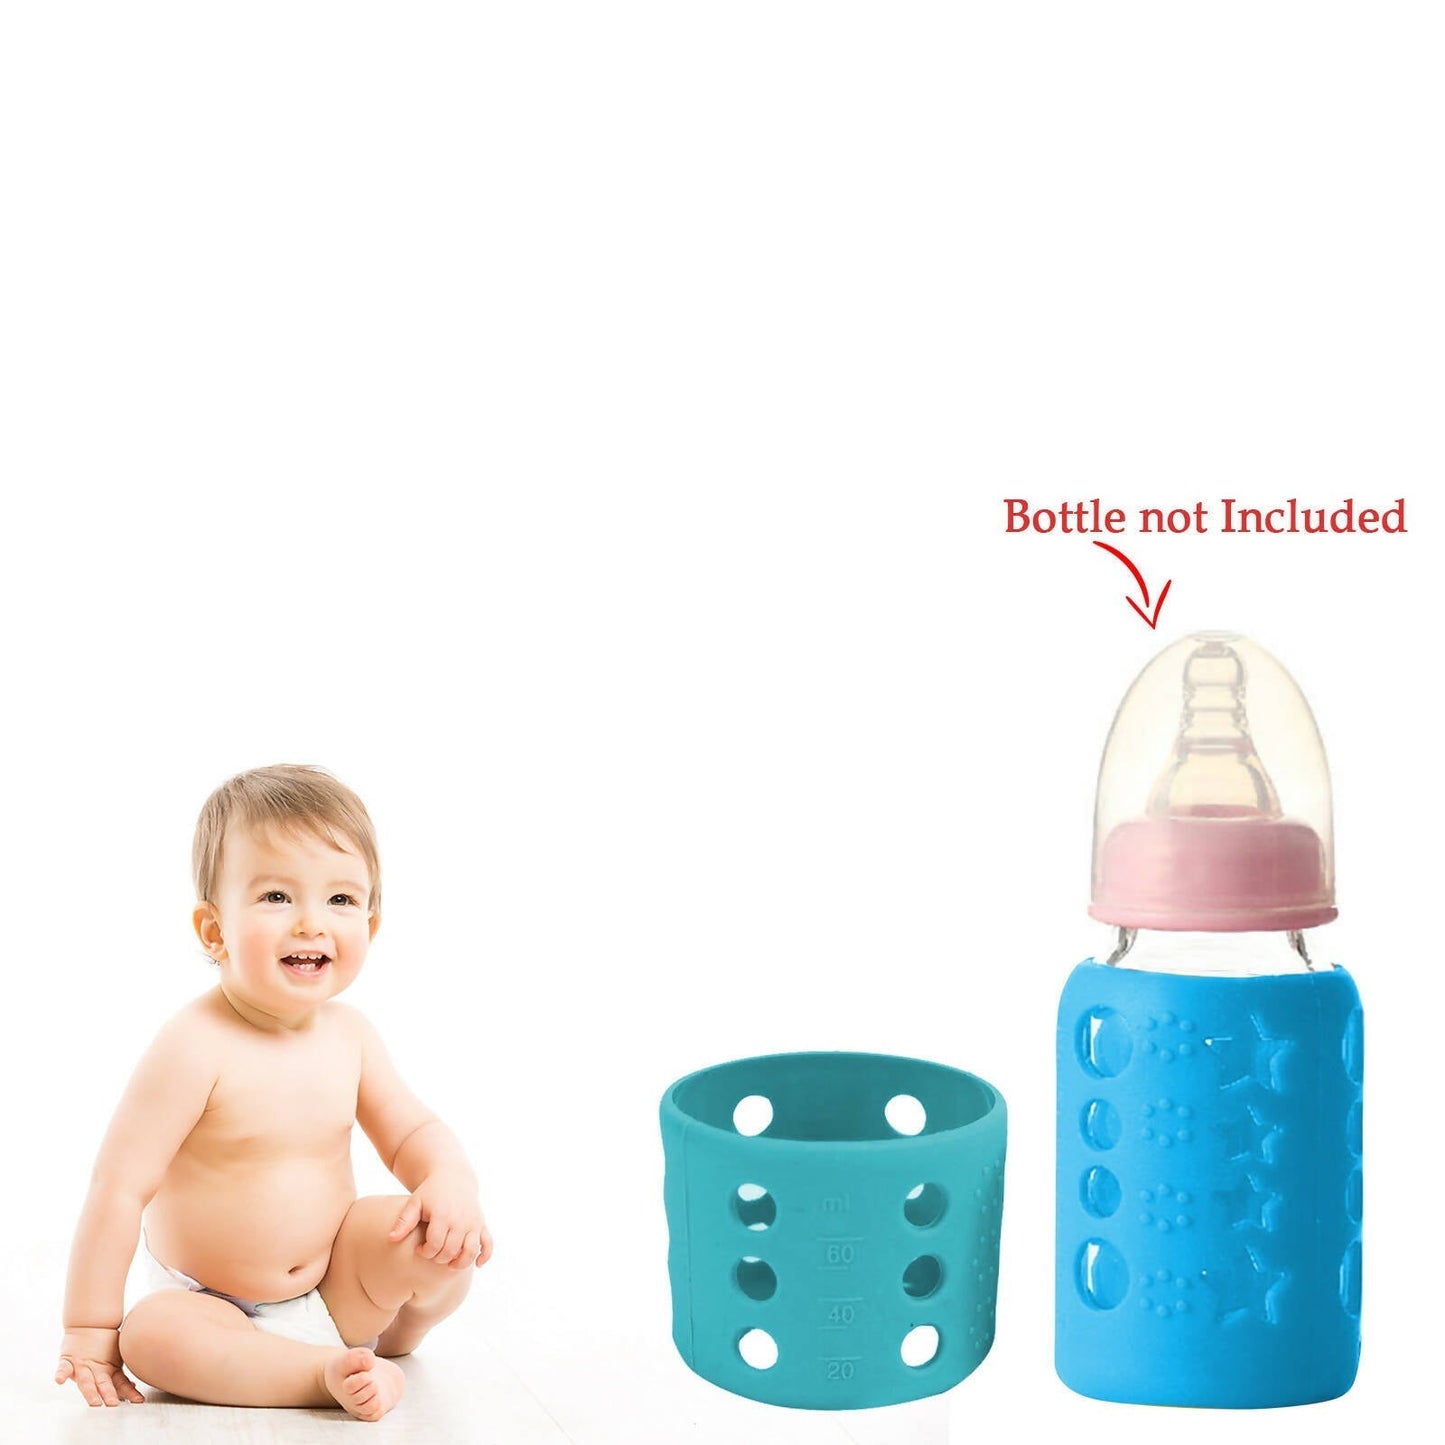 Safe-O-Kid Silicone Baby Feeding Bottle Cover Cum Sleeve for Insulated Protection 60mL- Blue -  USA, Australia, Canada 